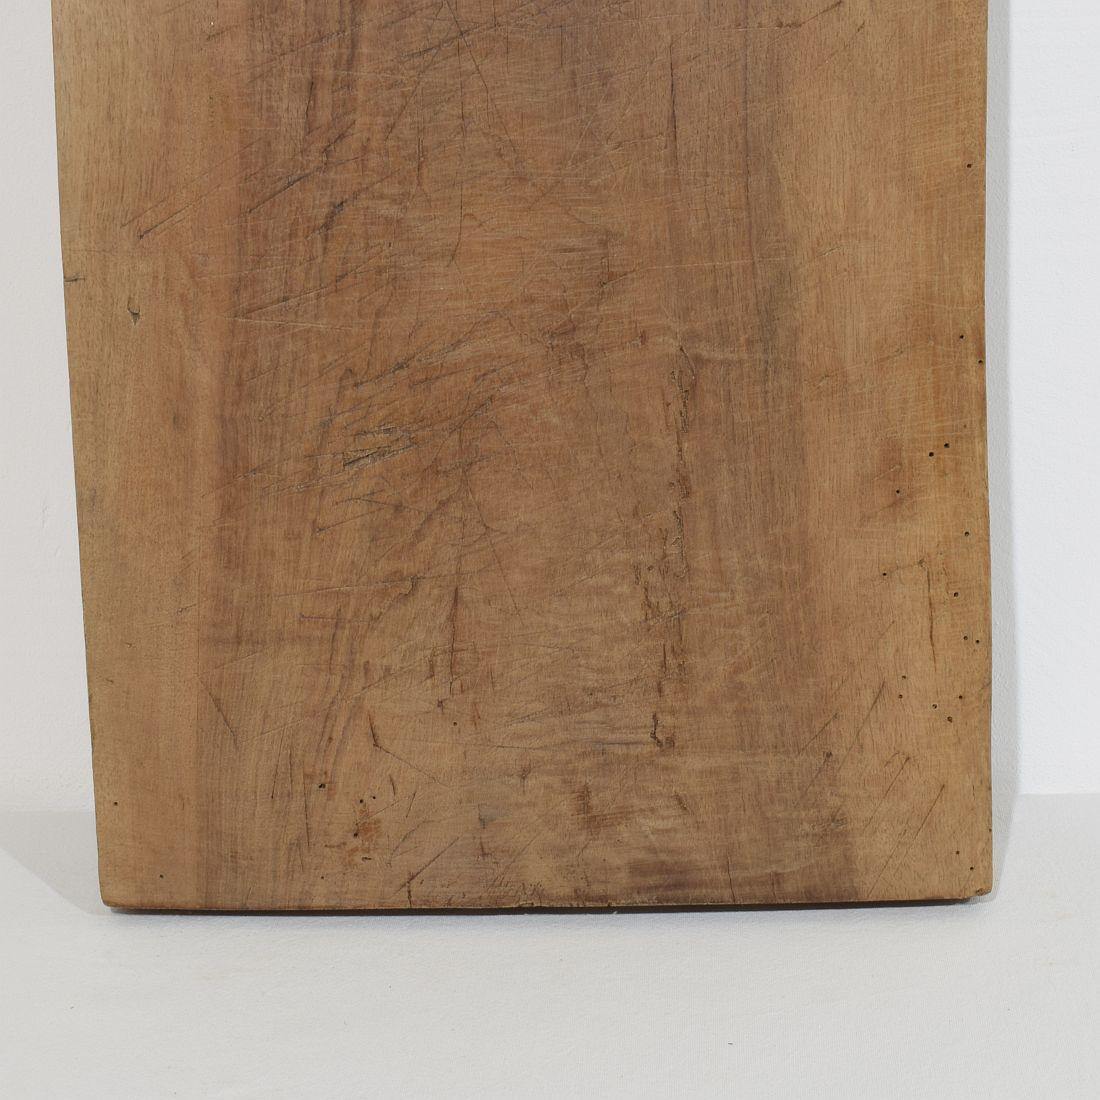 French 19th Century, Thick Wooden Chopping or Cutting Board 6